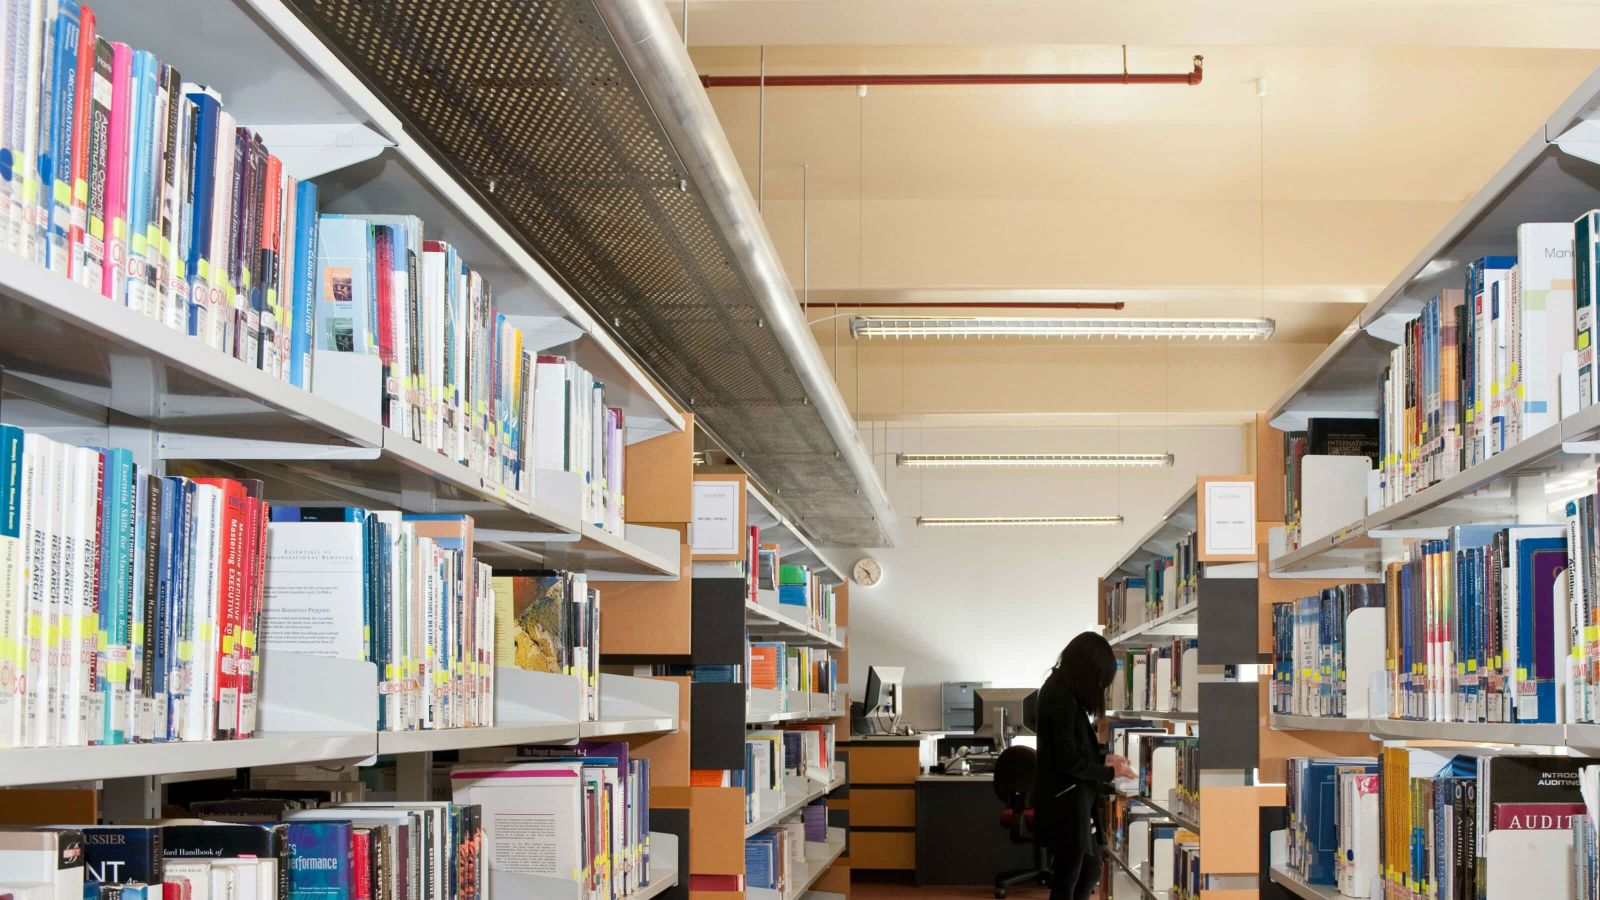 Books on shelves in a library. A student can be seen looking at books on one of the shelves.